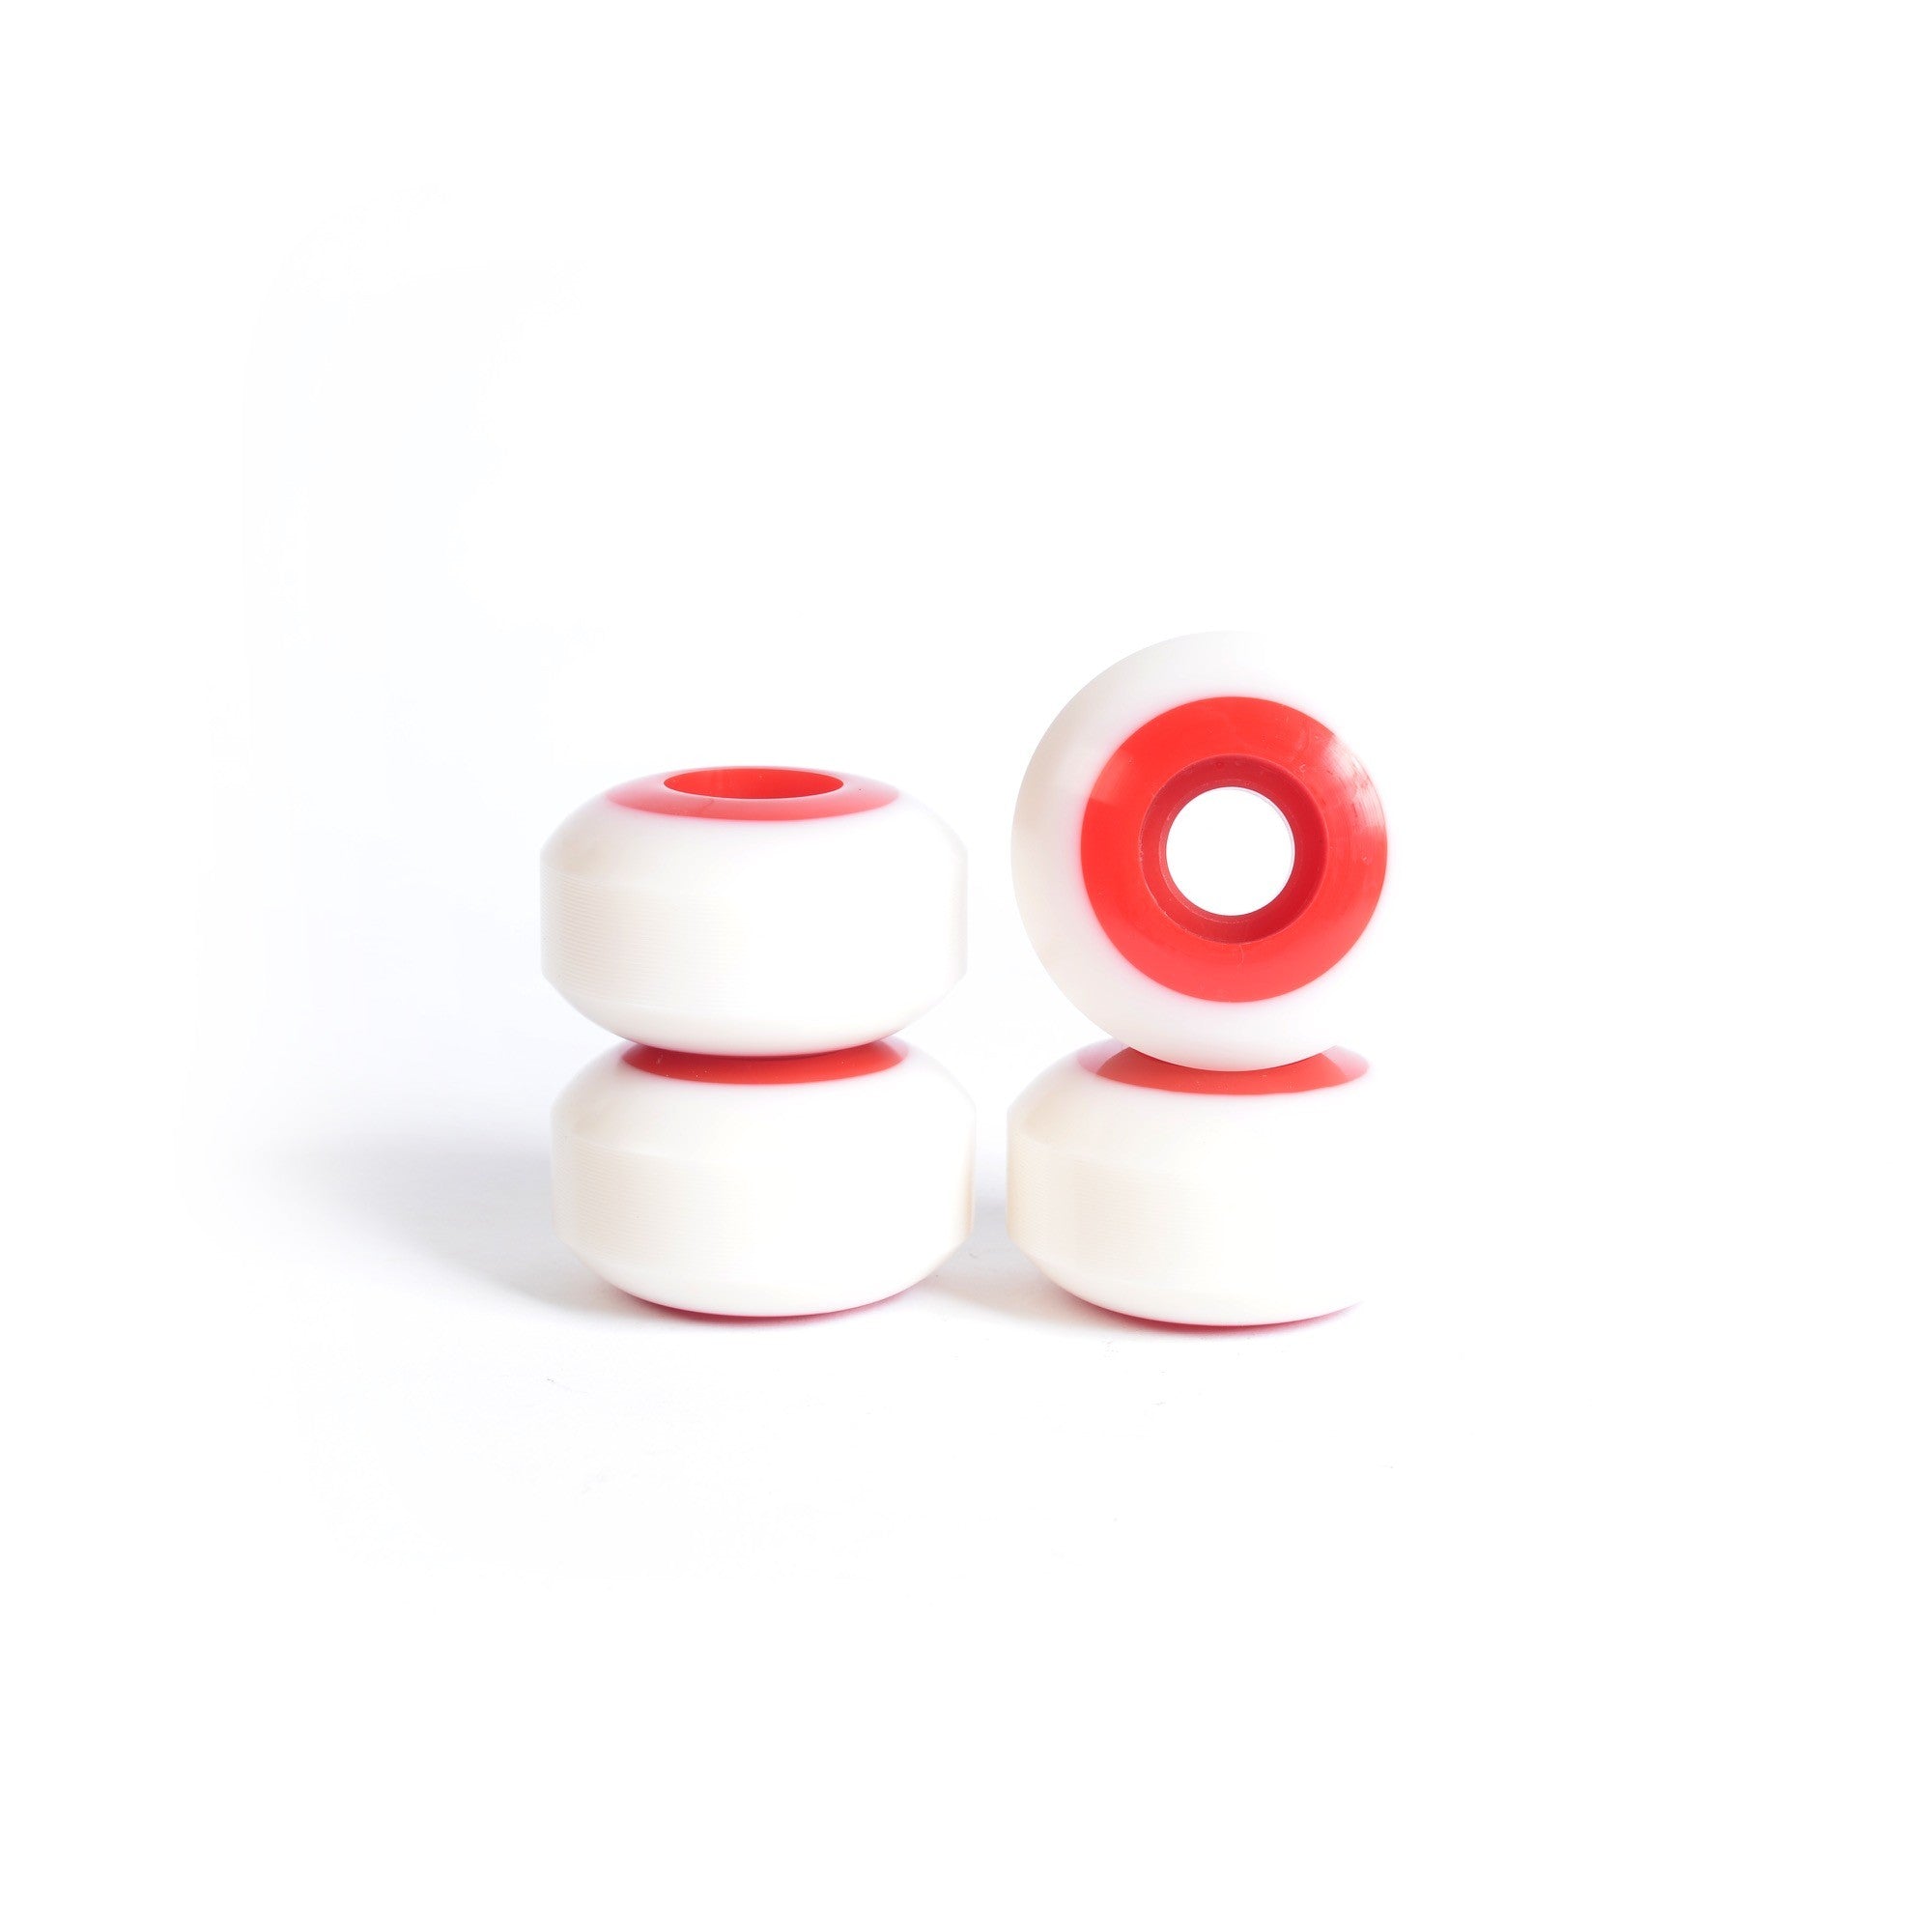 Skateboard wheels - YOCAHER 52x31mm 99a - White/Red